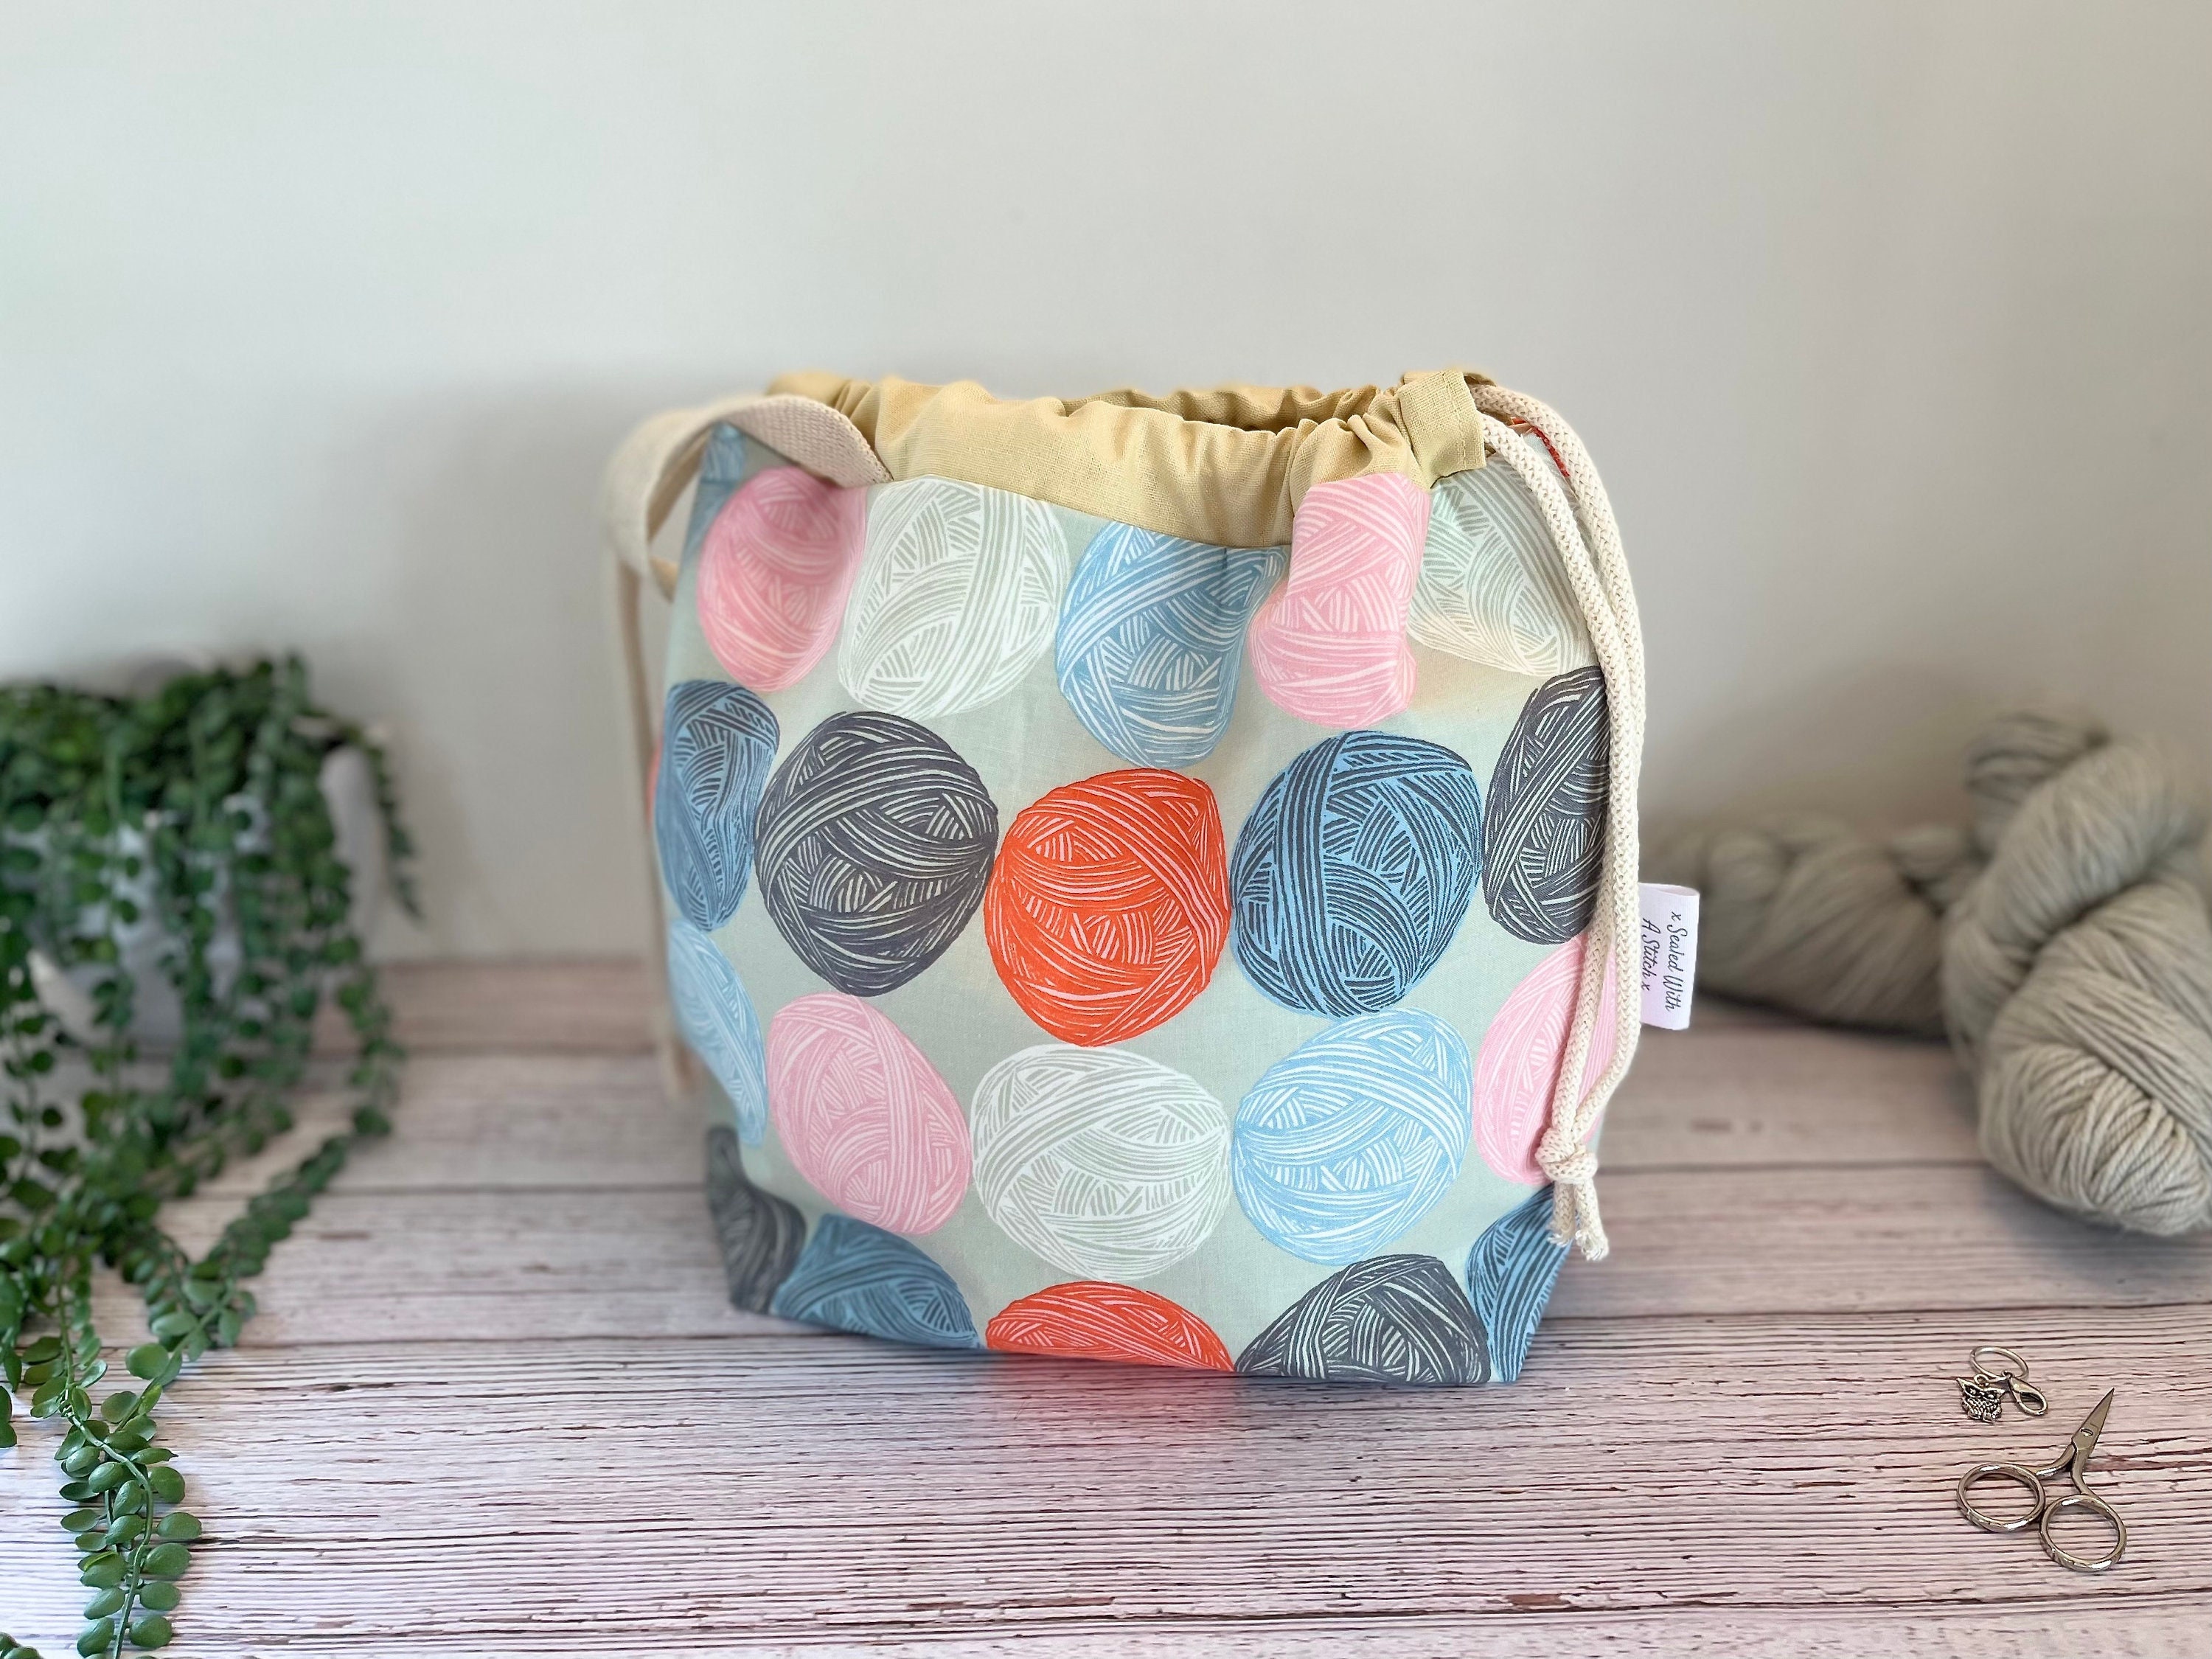 ORGANIZATION: Handmade Project Bags, Medium and Large Project Bags